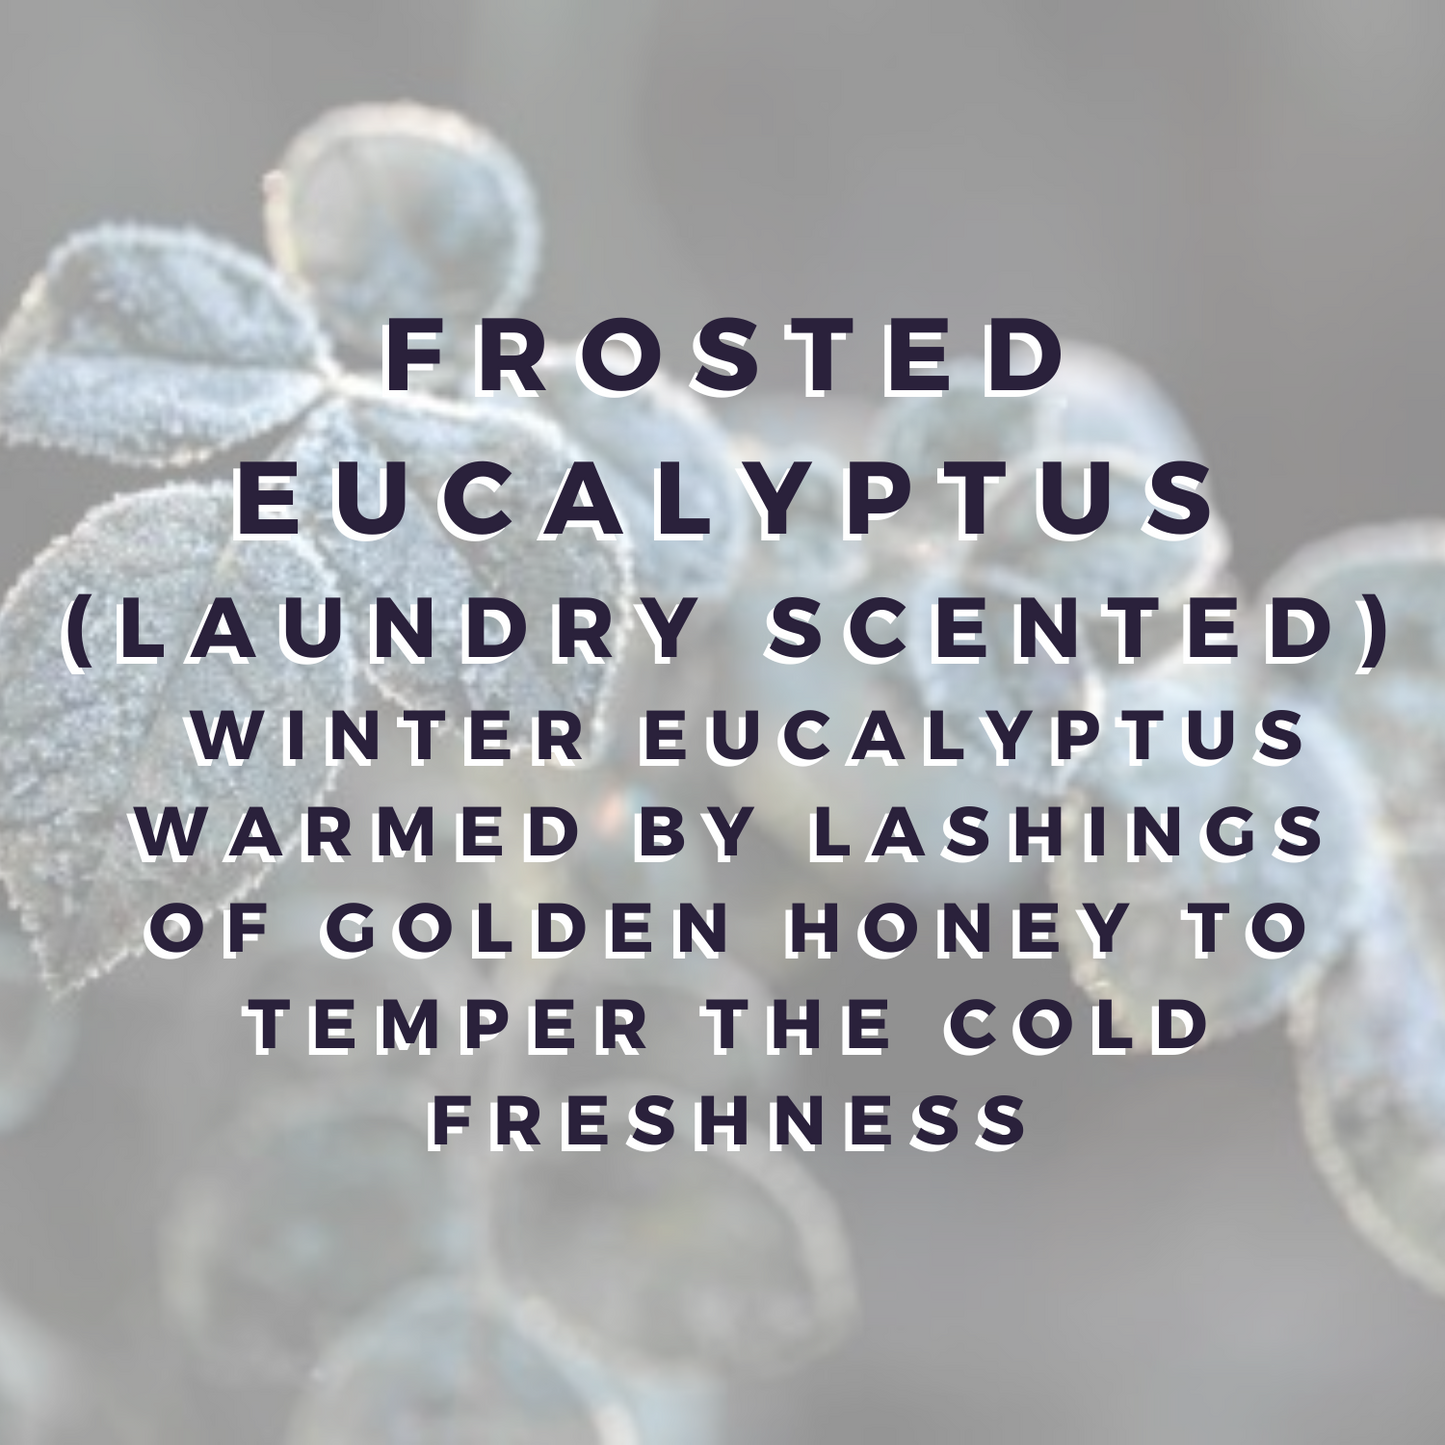 Frosted Eucalyptus Wax Bar (laundry scented)